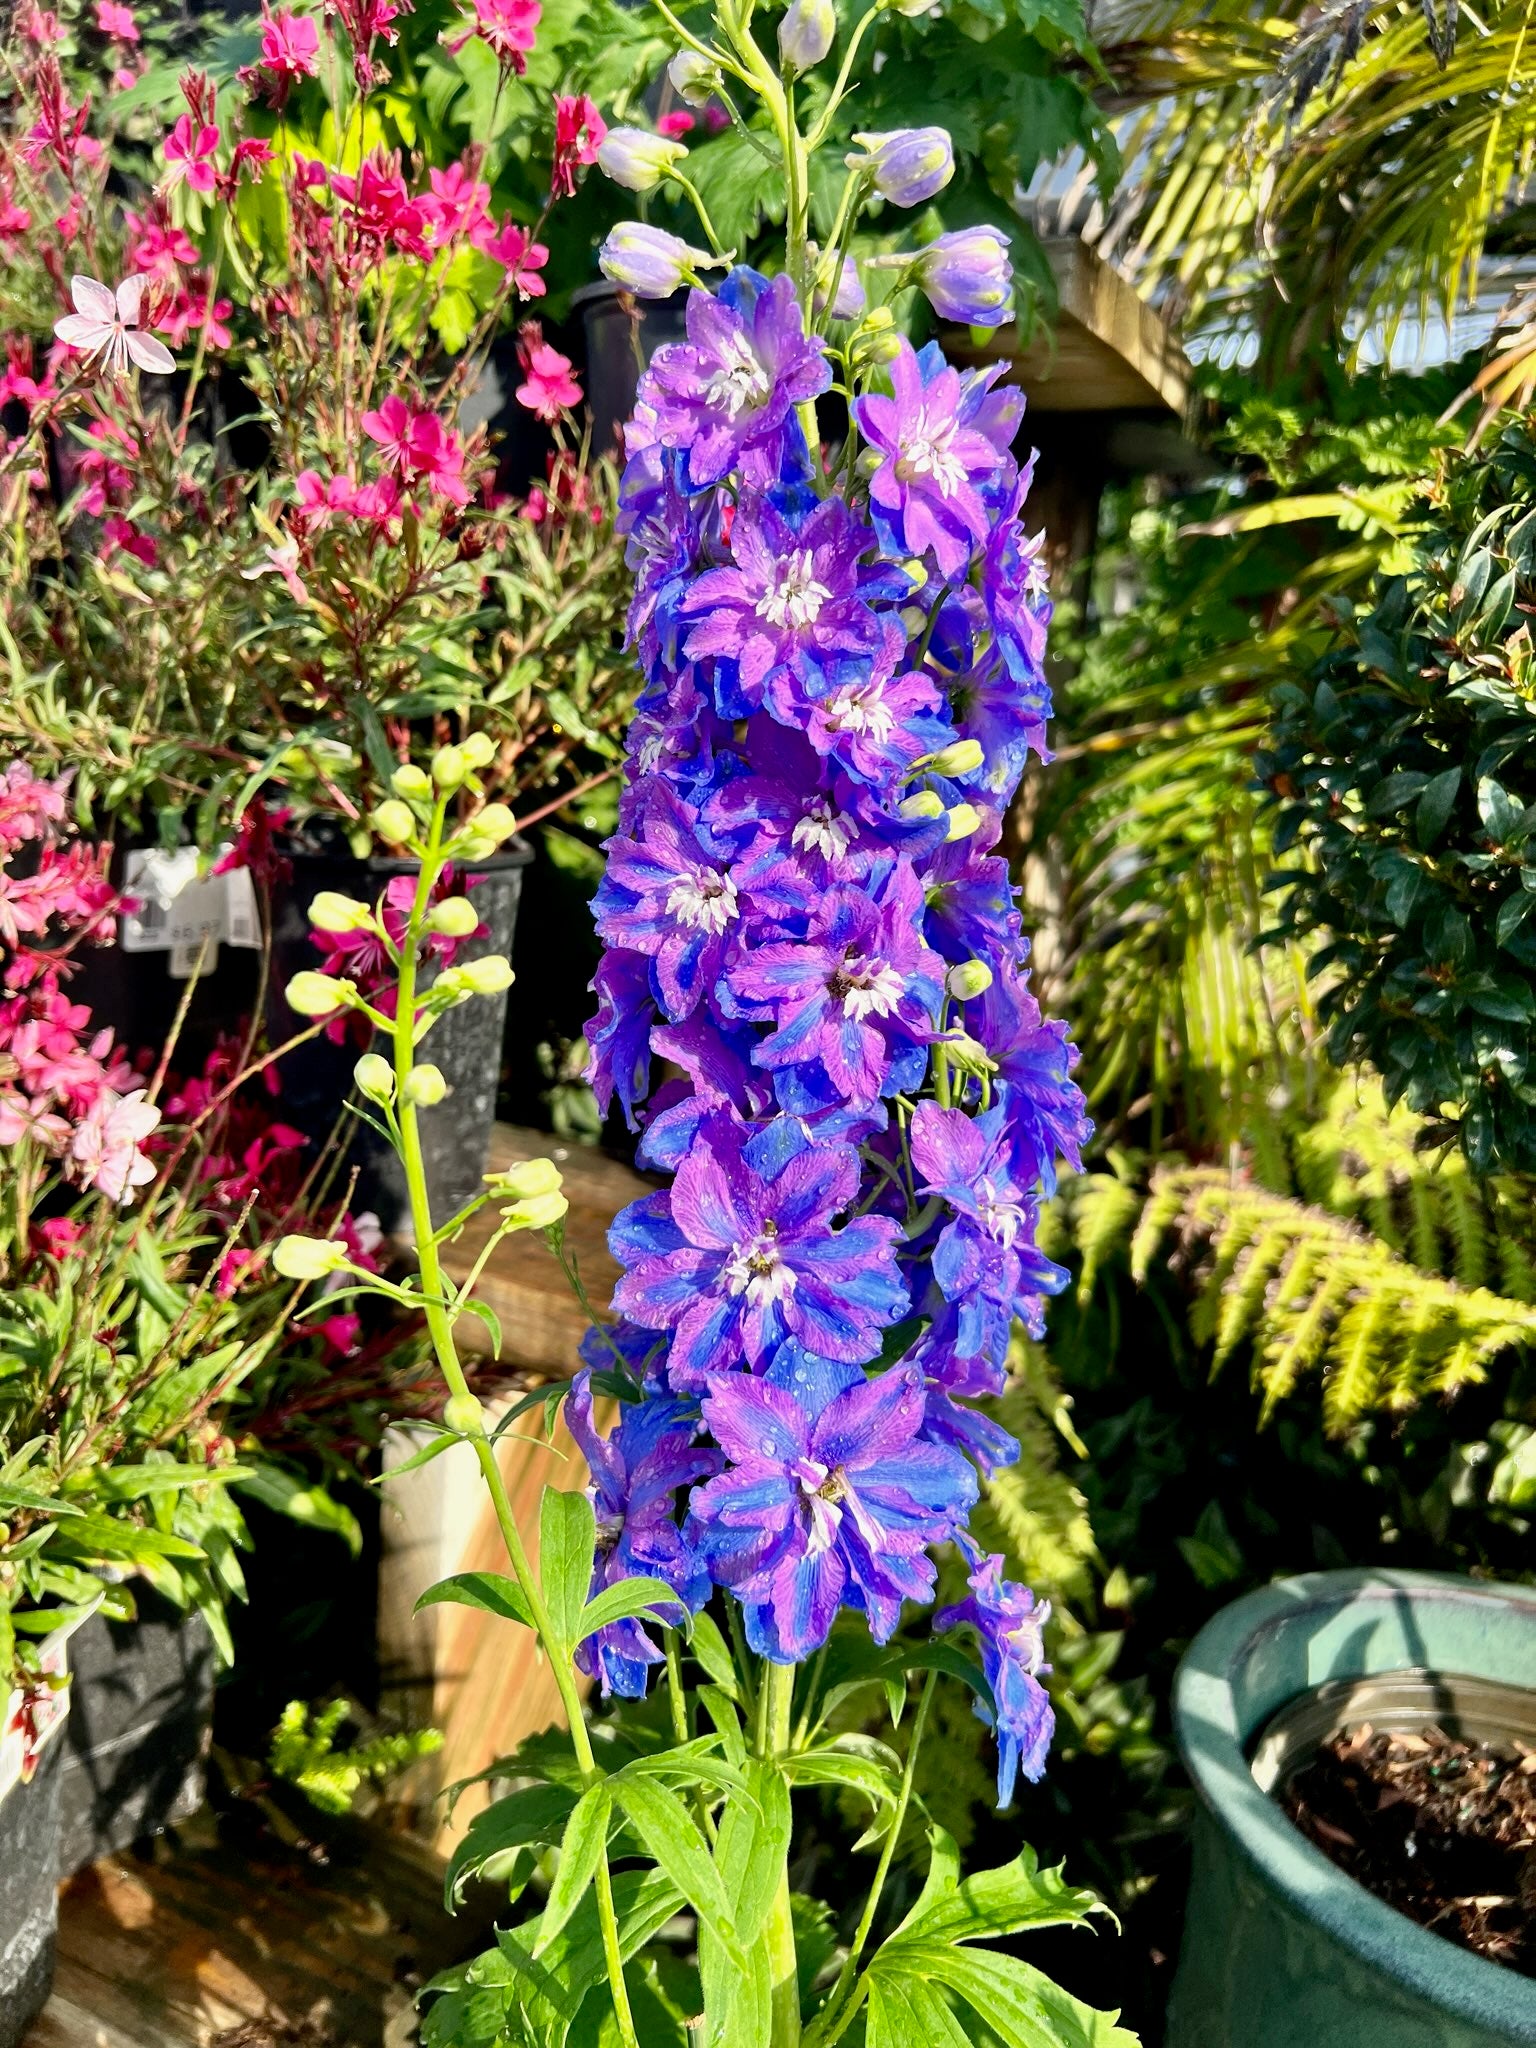 Beautiful Delphinium Guardian Plant blooming with a large stalk of purple and blue flowers